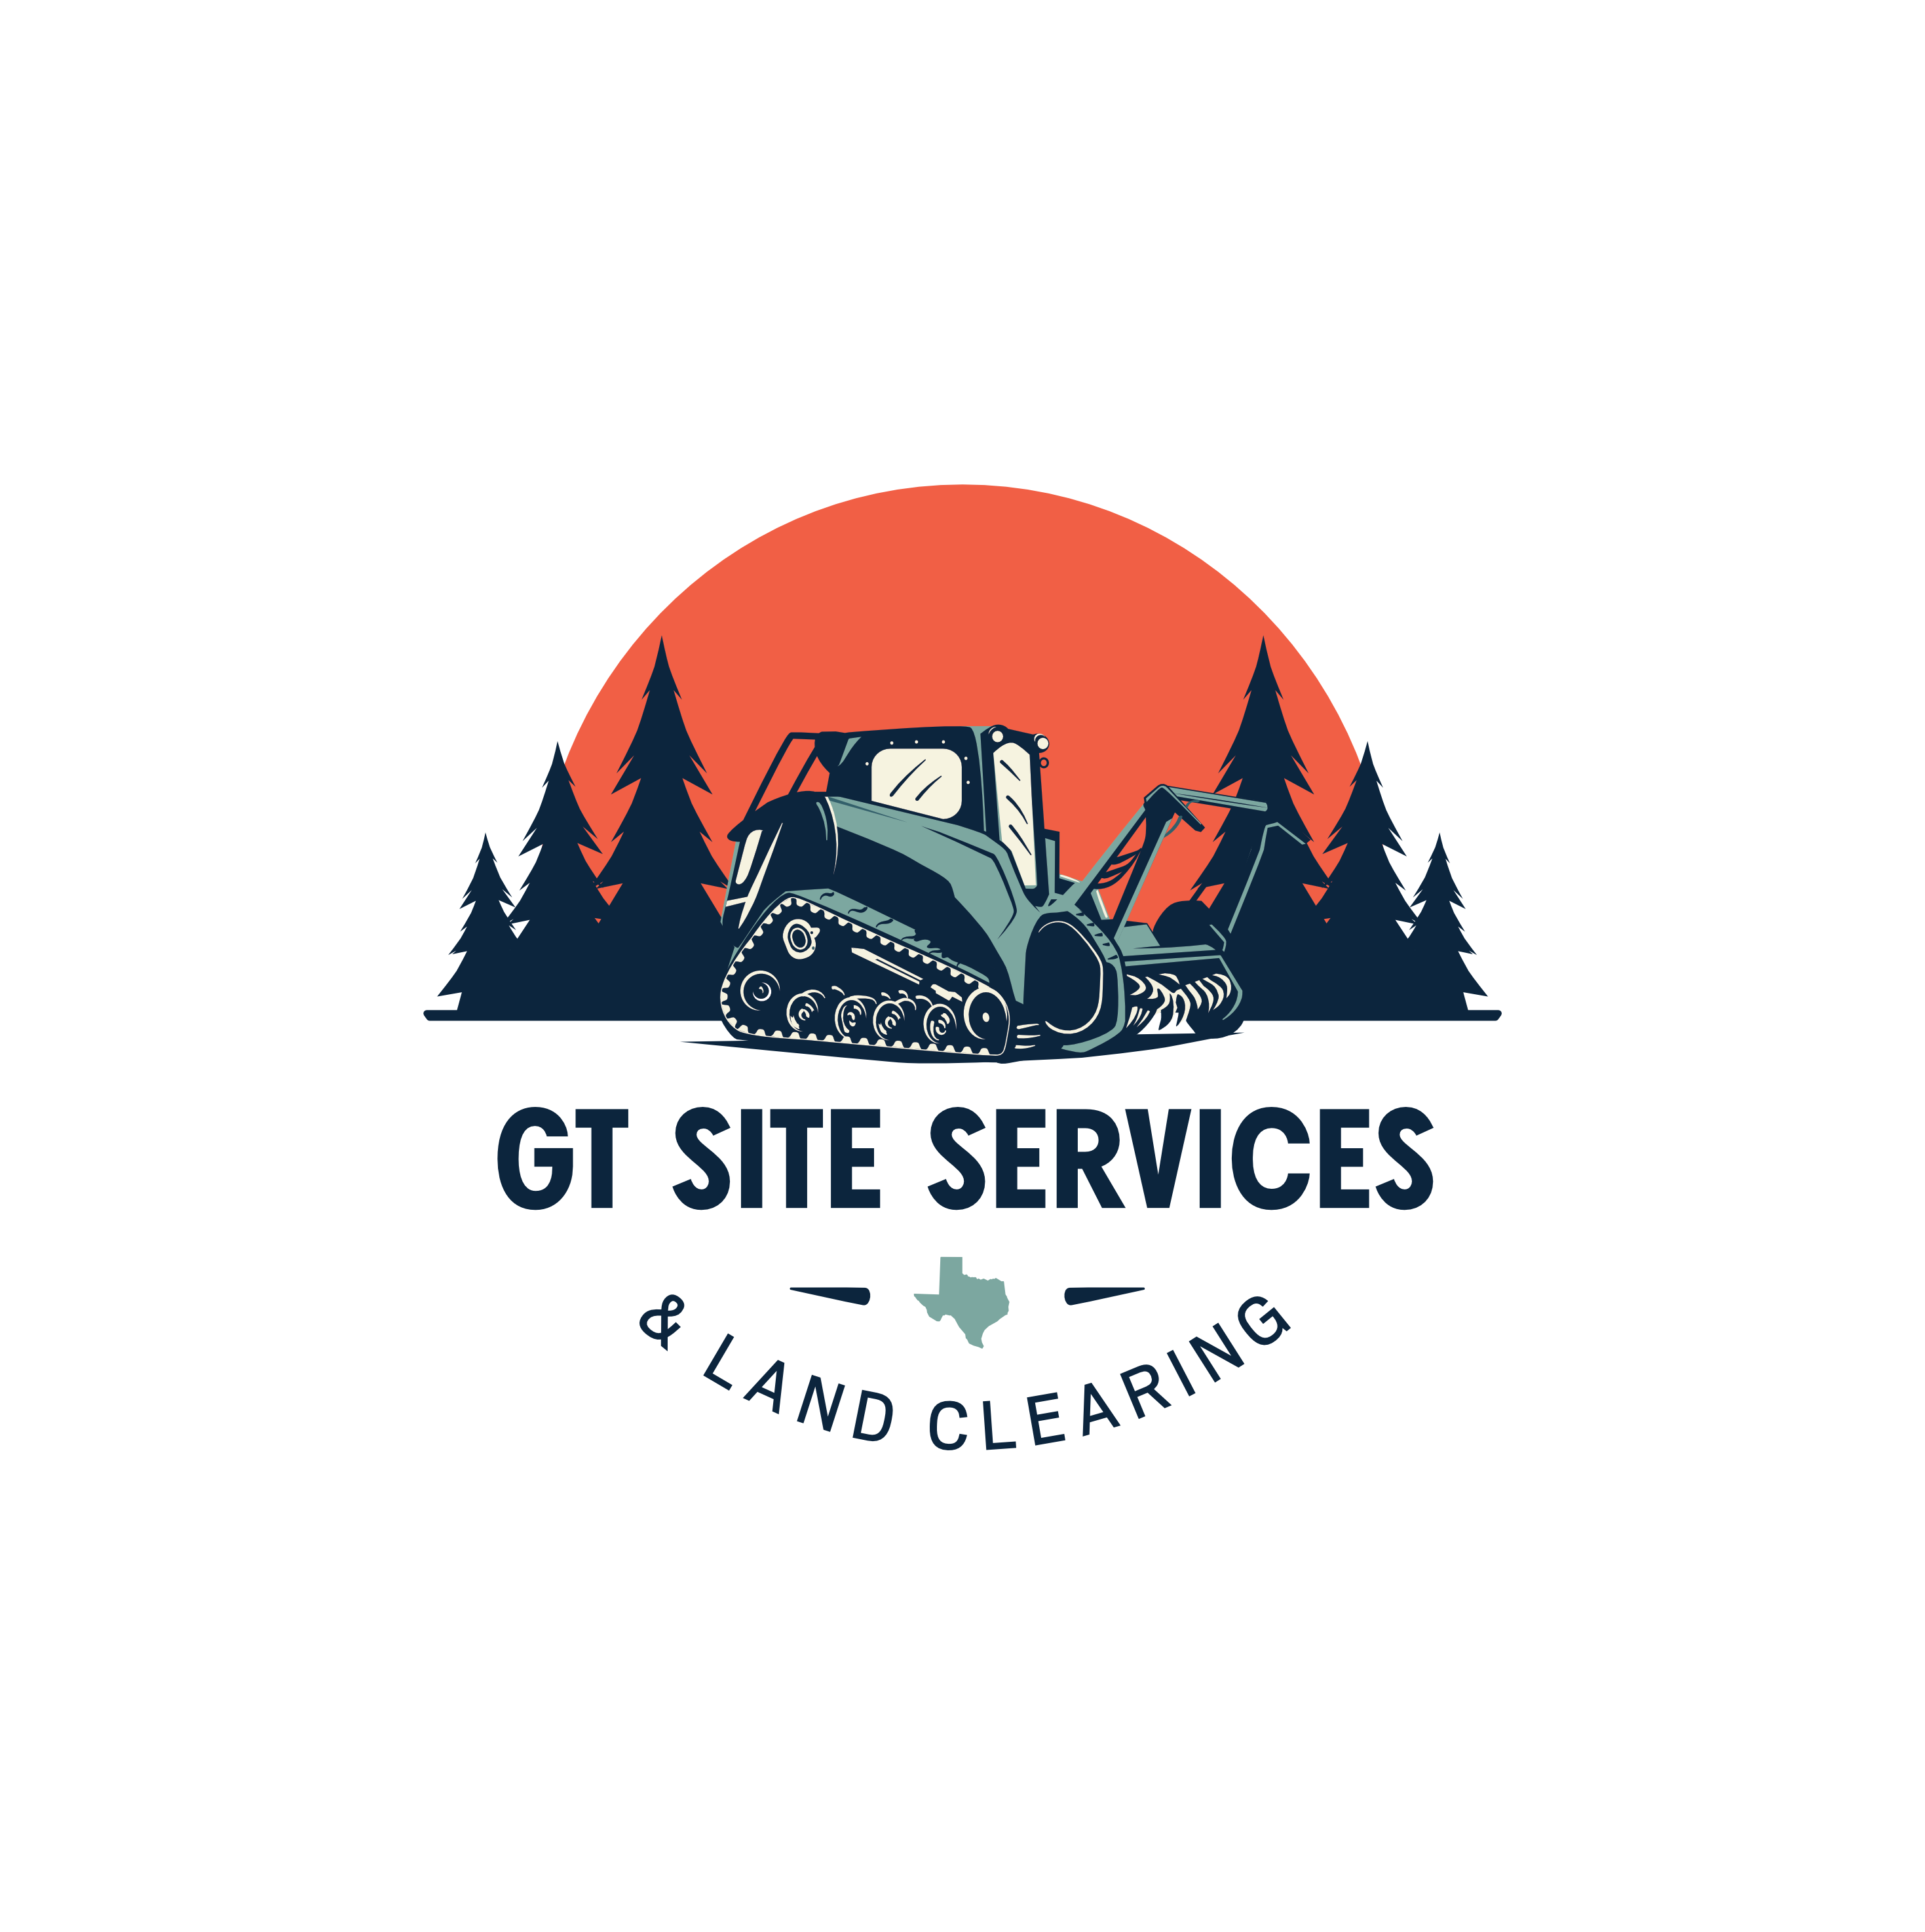 GT Site Services & Land Clearing, LLC Logo